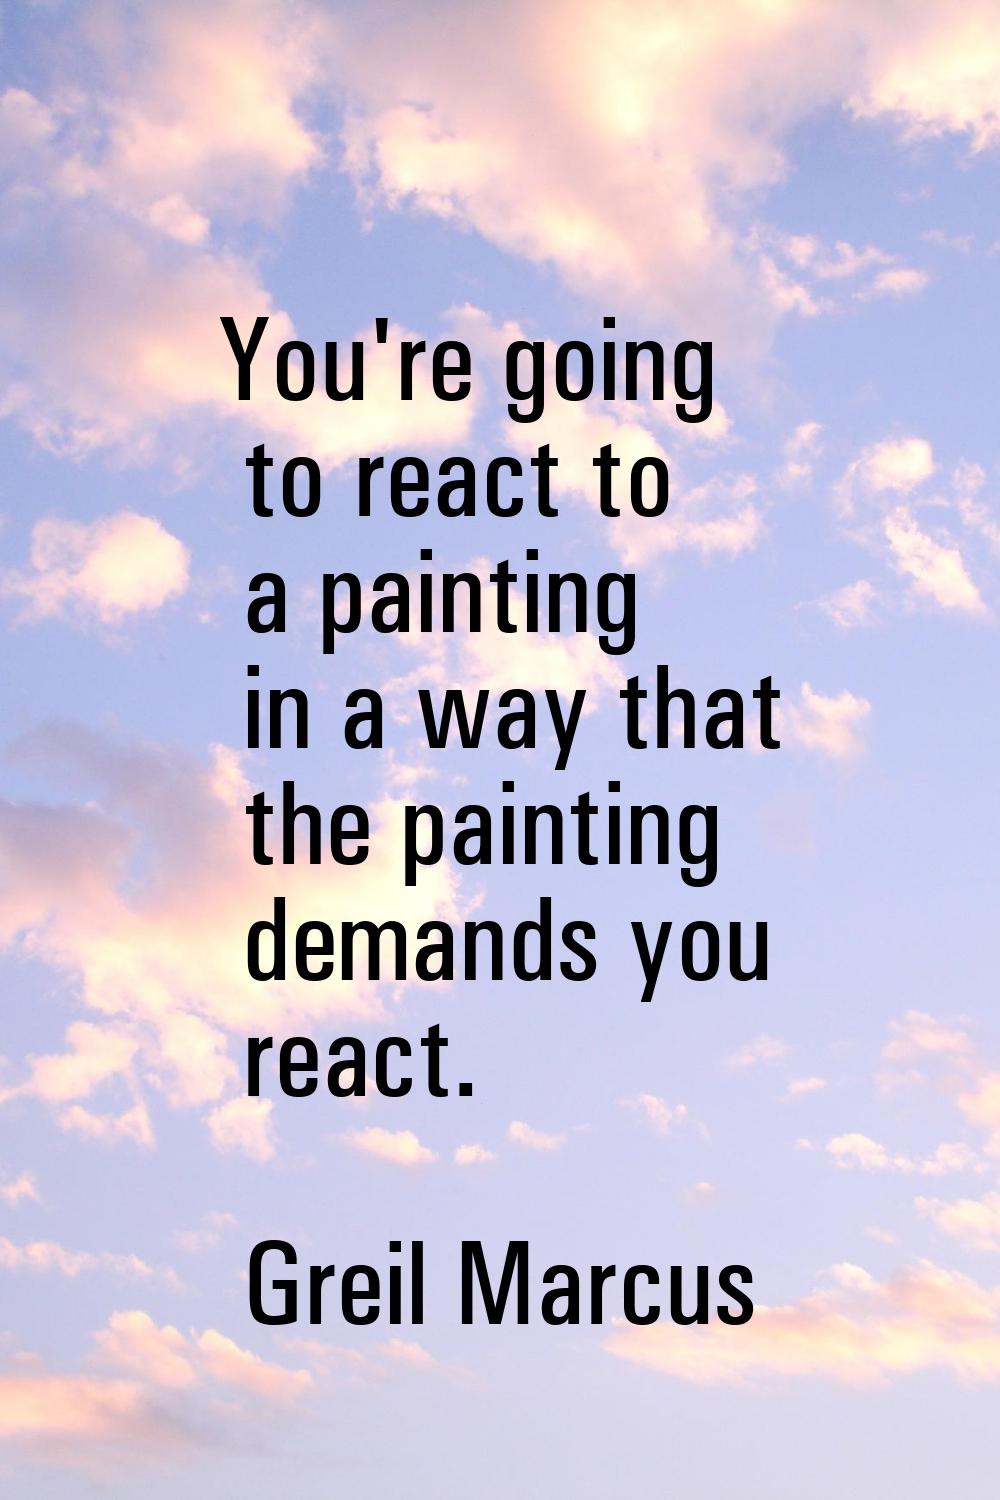 You're going to react to a painting in a way that the painting demands you react.